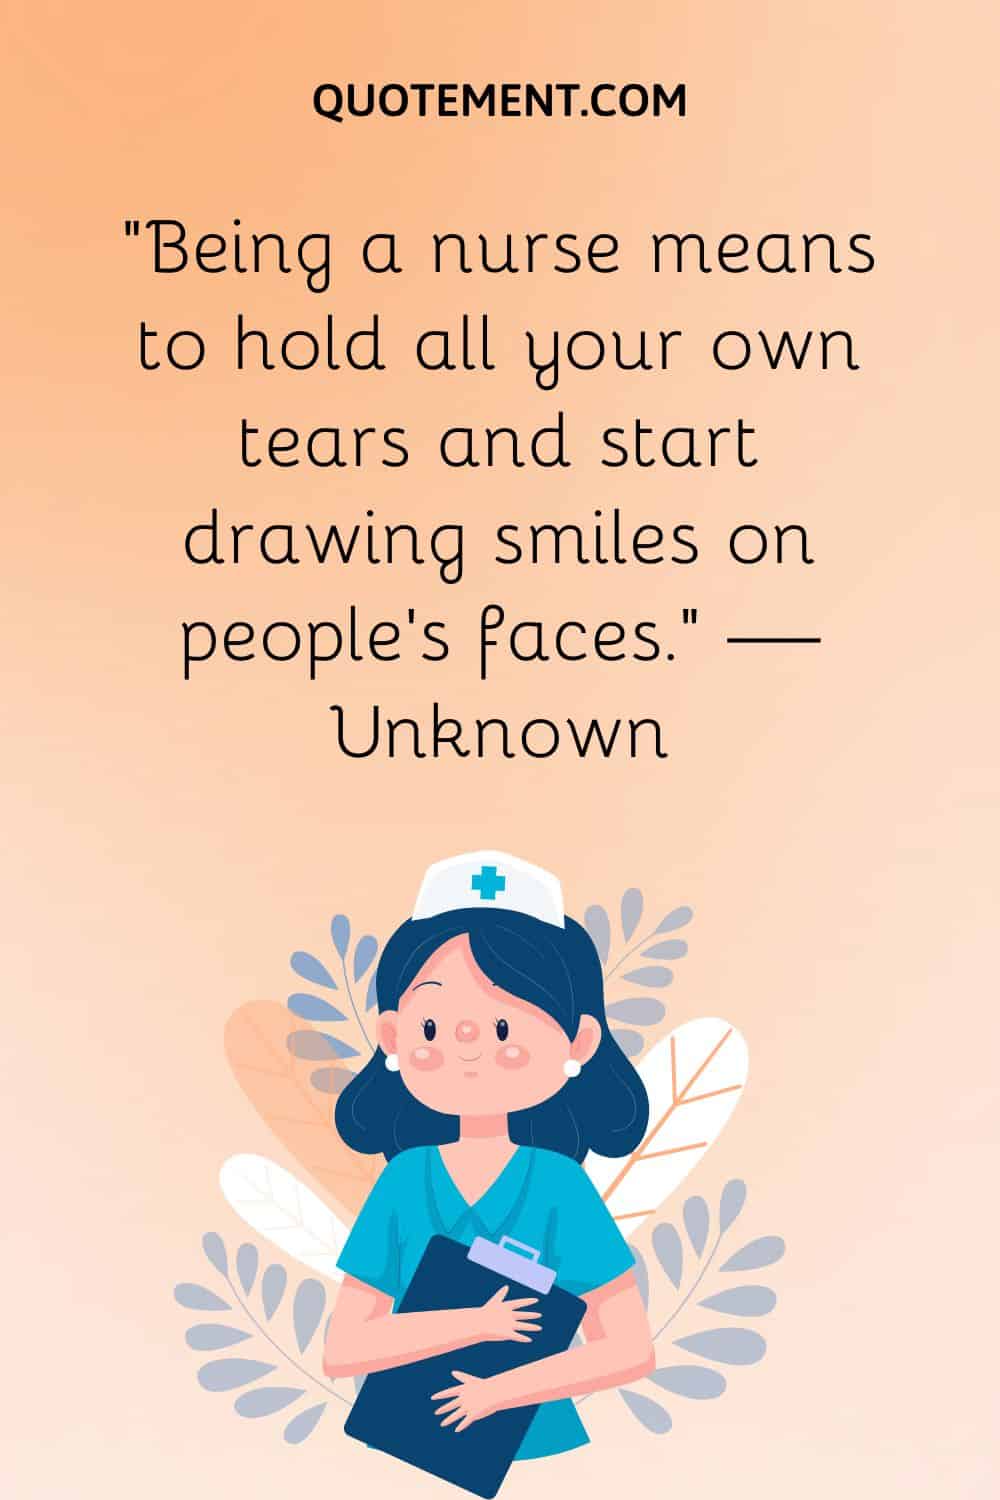 “Being a nurse means to hold all your own tears and start drawing smiles on people’s faces.” — Unknown